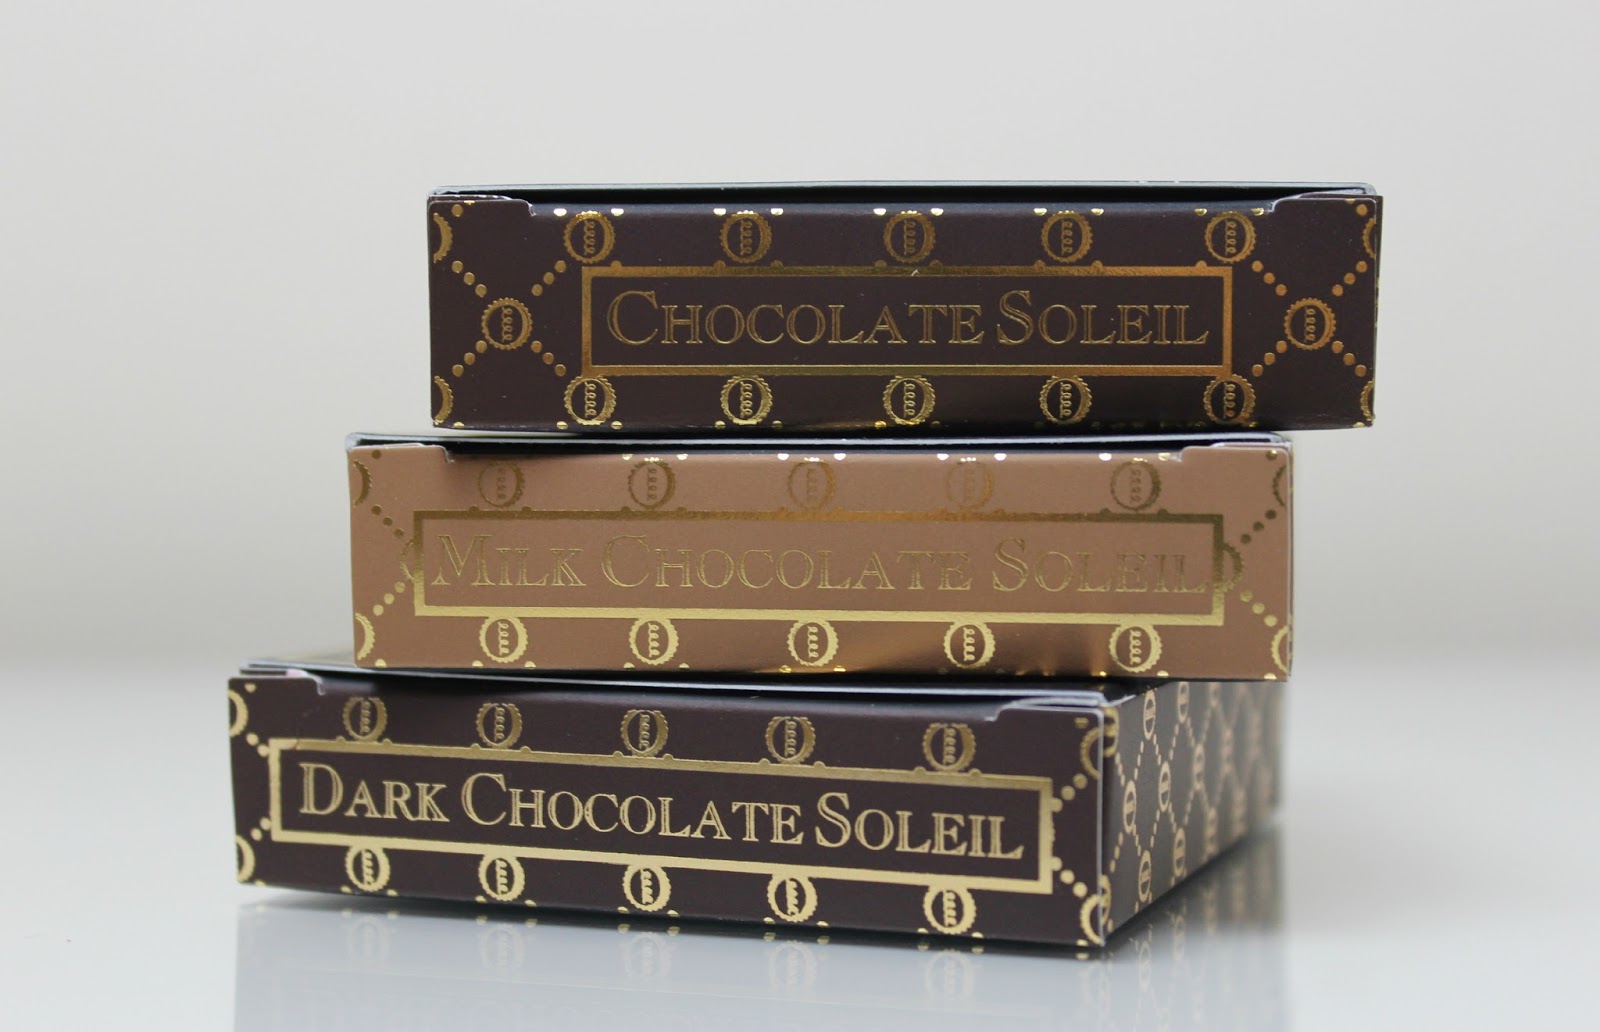 A picture of Too Faced Milk Chocolate Soleil, Chocolate Soleil and Dark Chocolate Soleil